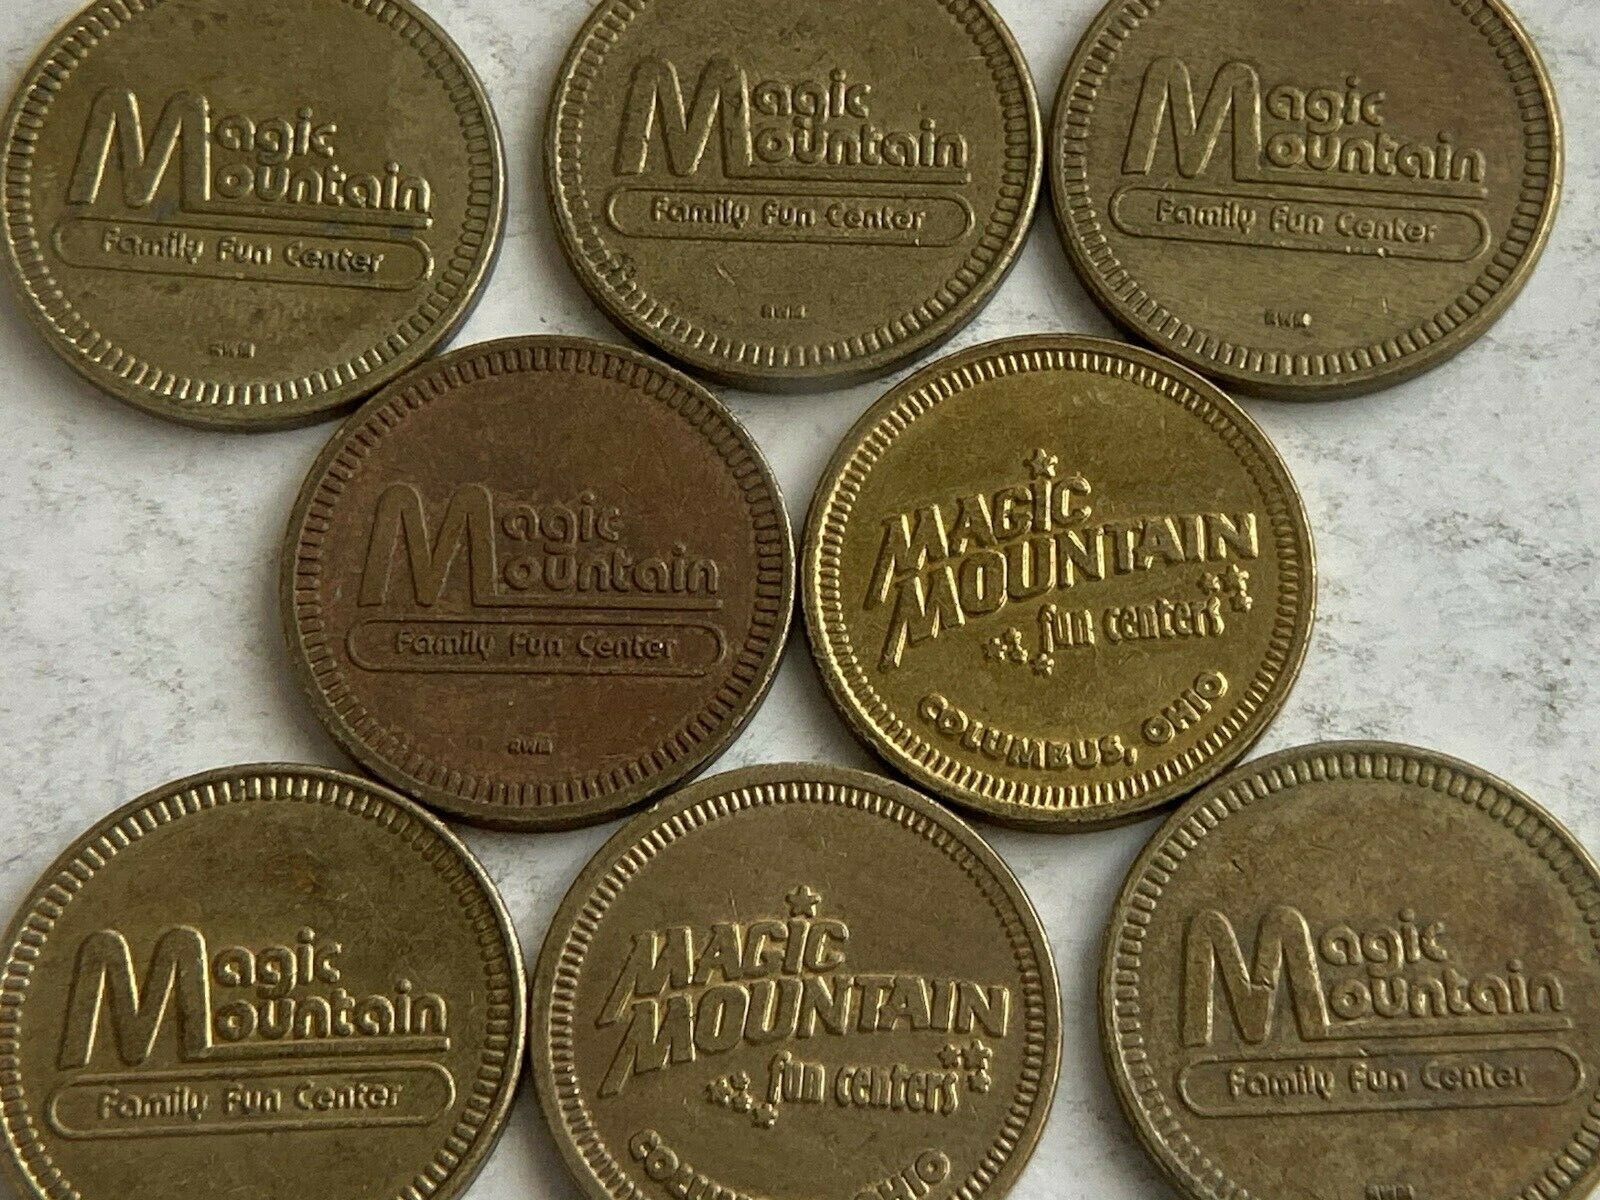 8 Vintage Magic Mountain Fun Centers Game Tokens - Mixed Years, Locations - LOOK